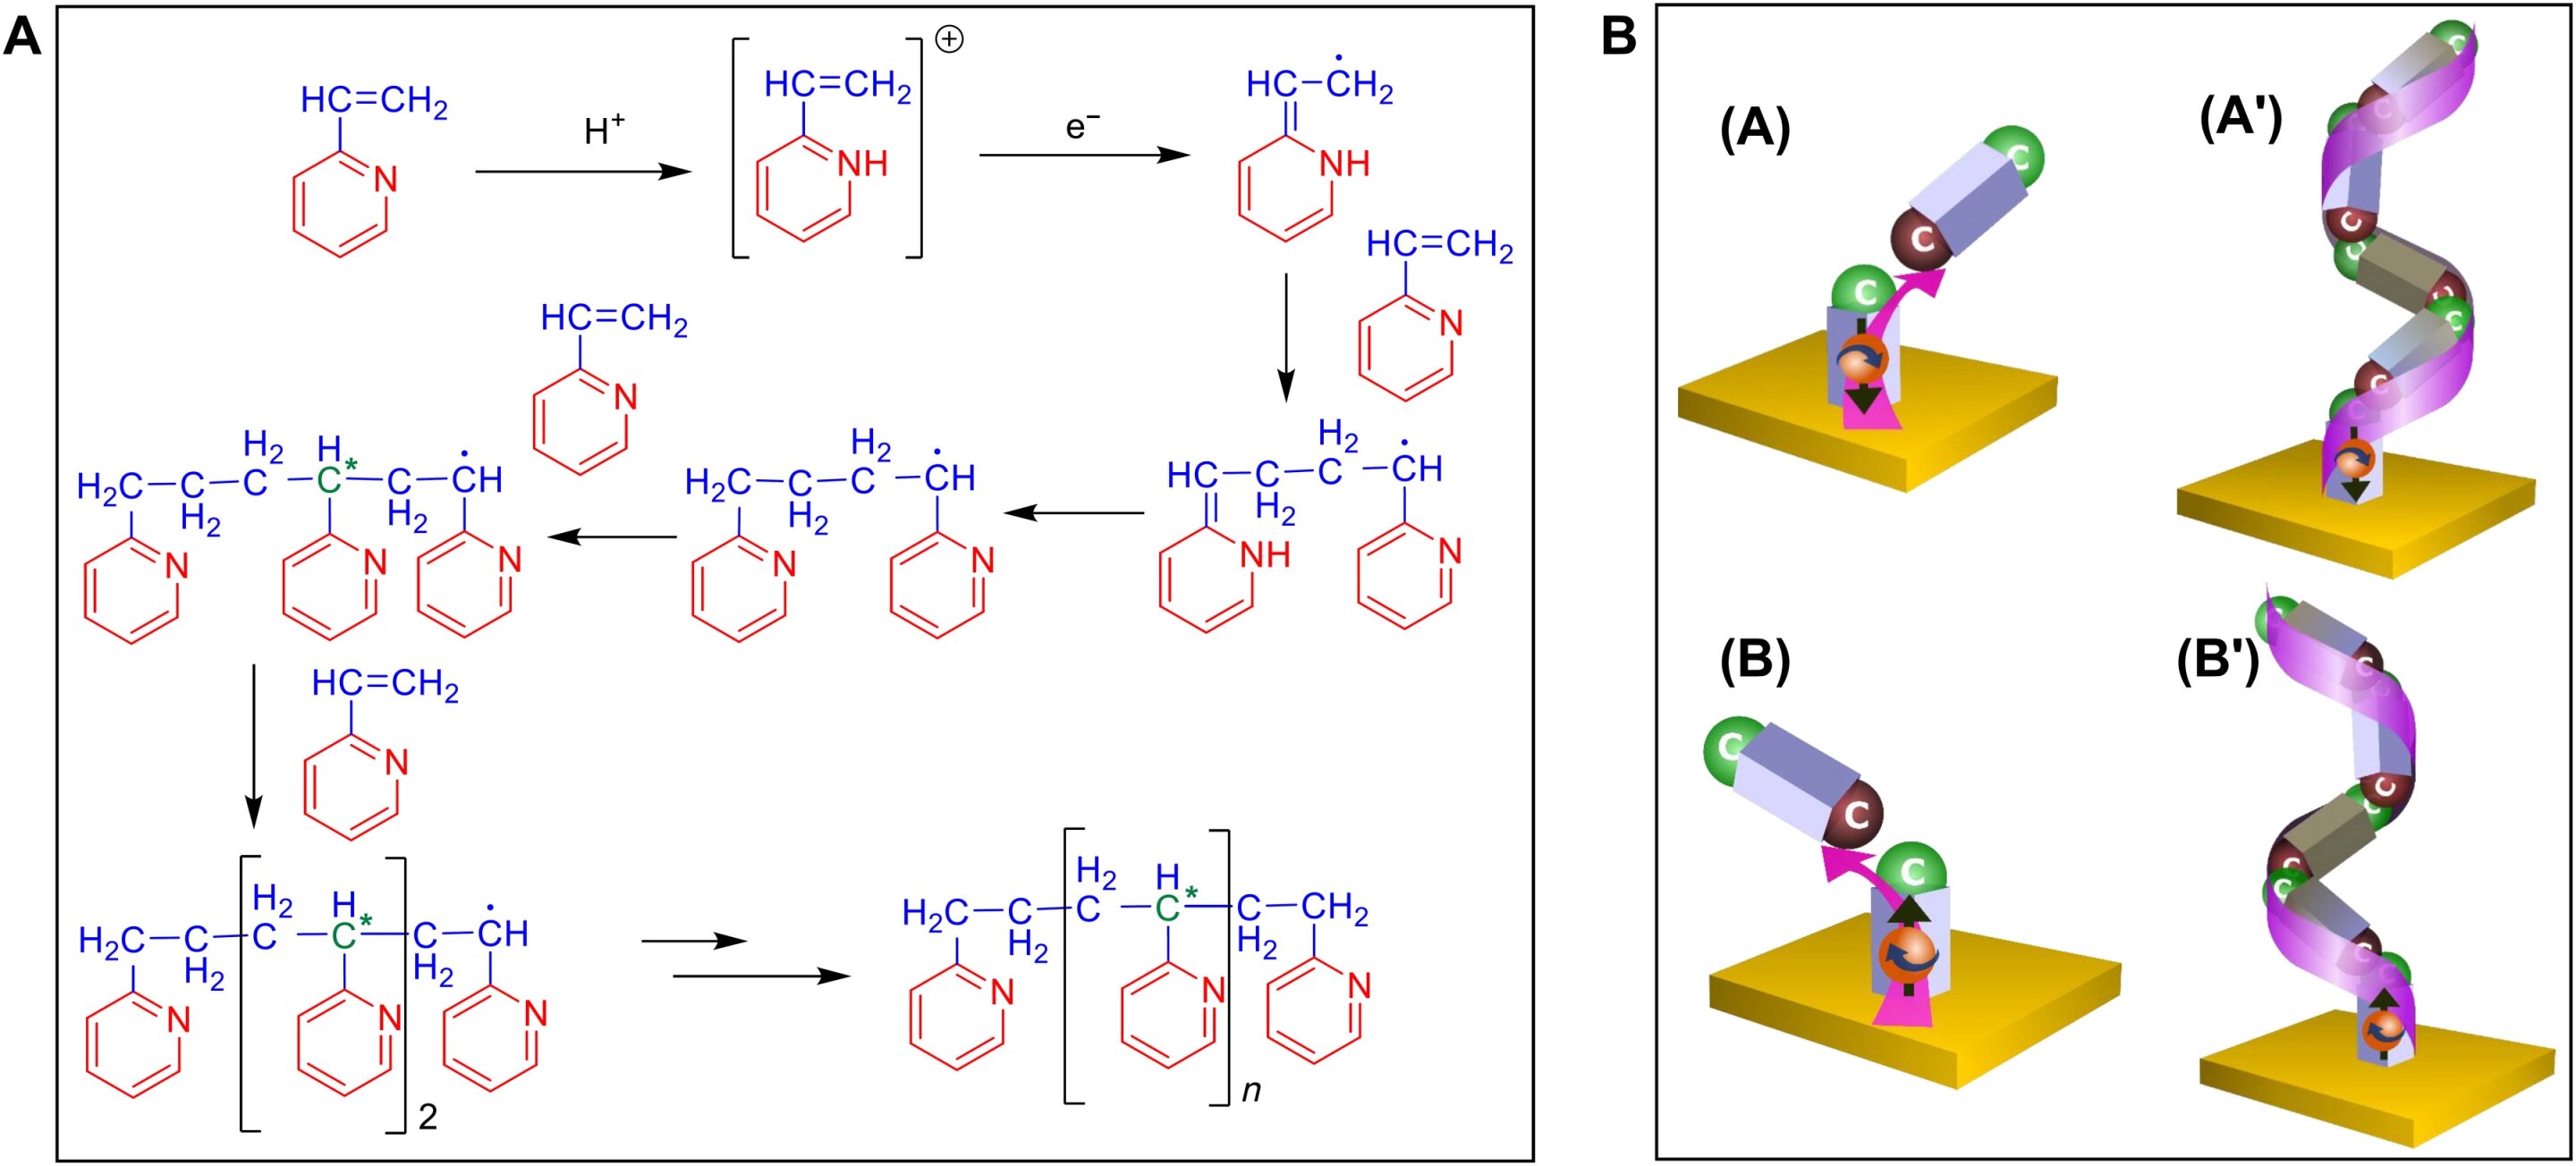 Creating a chiral polymer from achiral monomers using a magnetic field